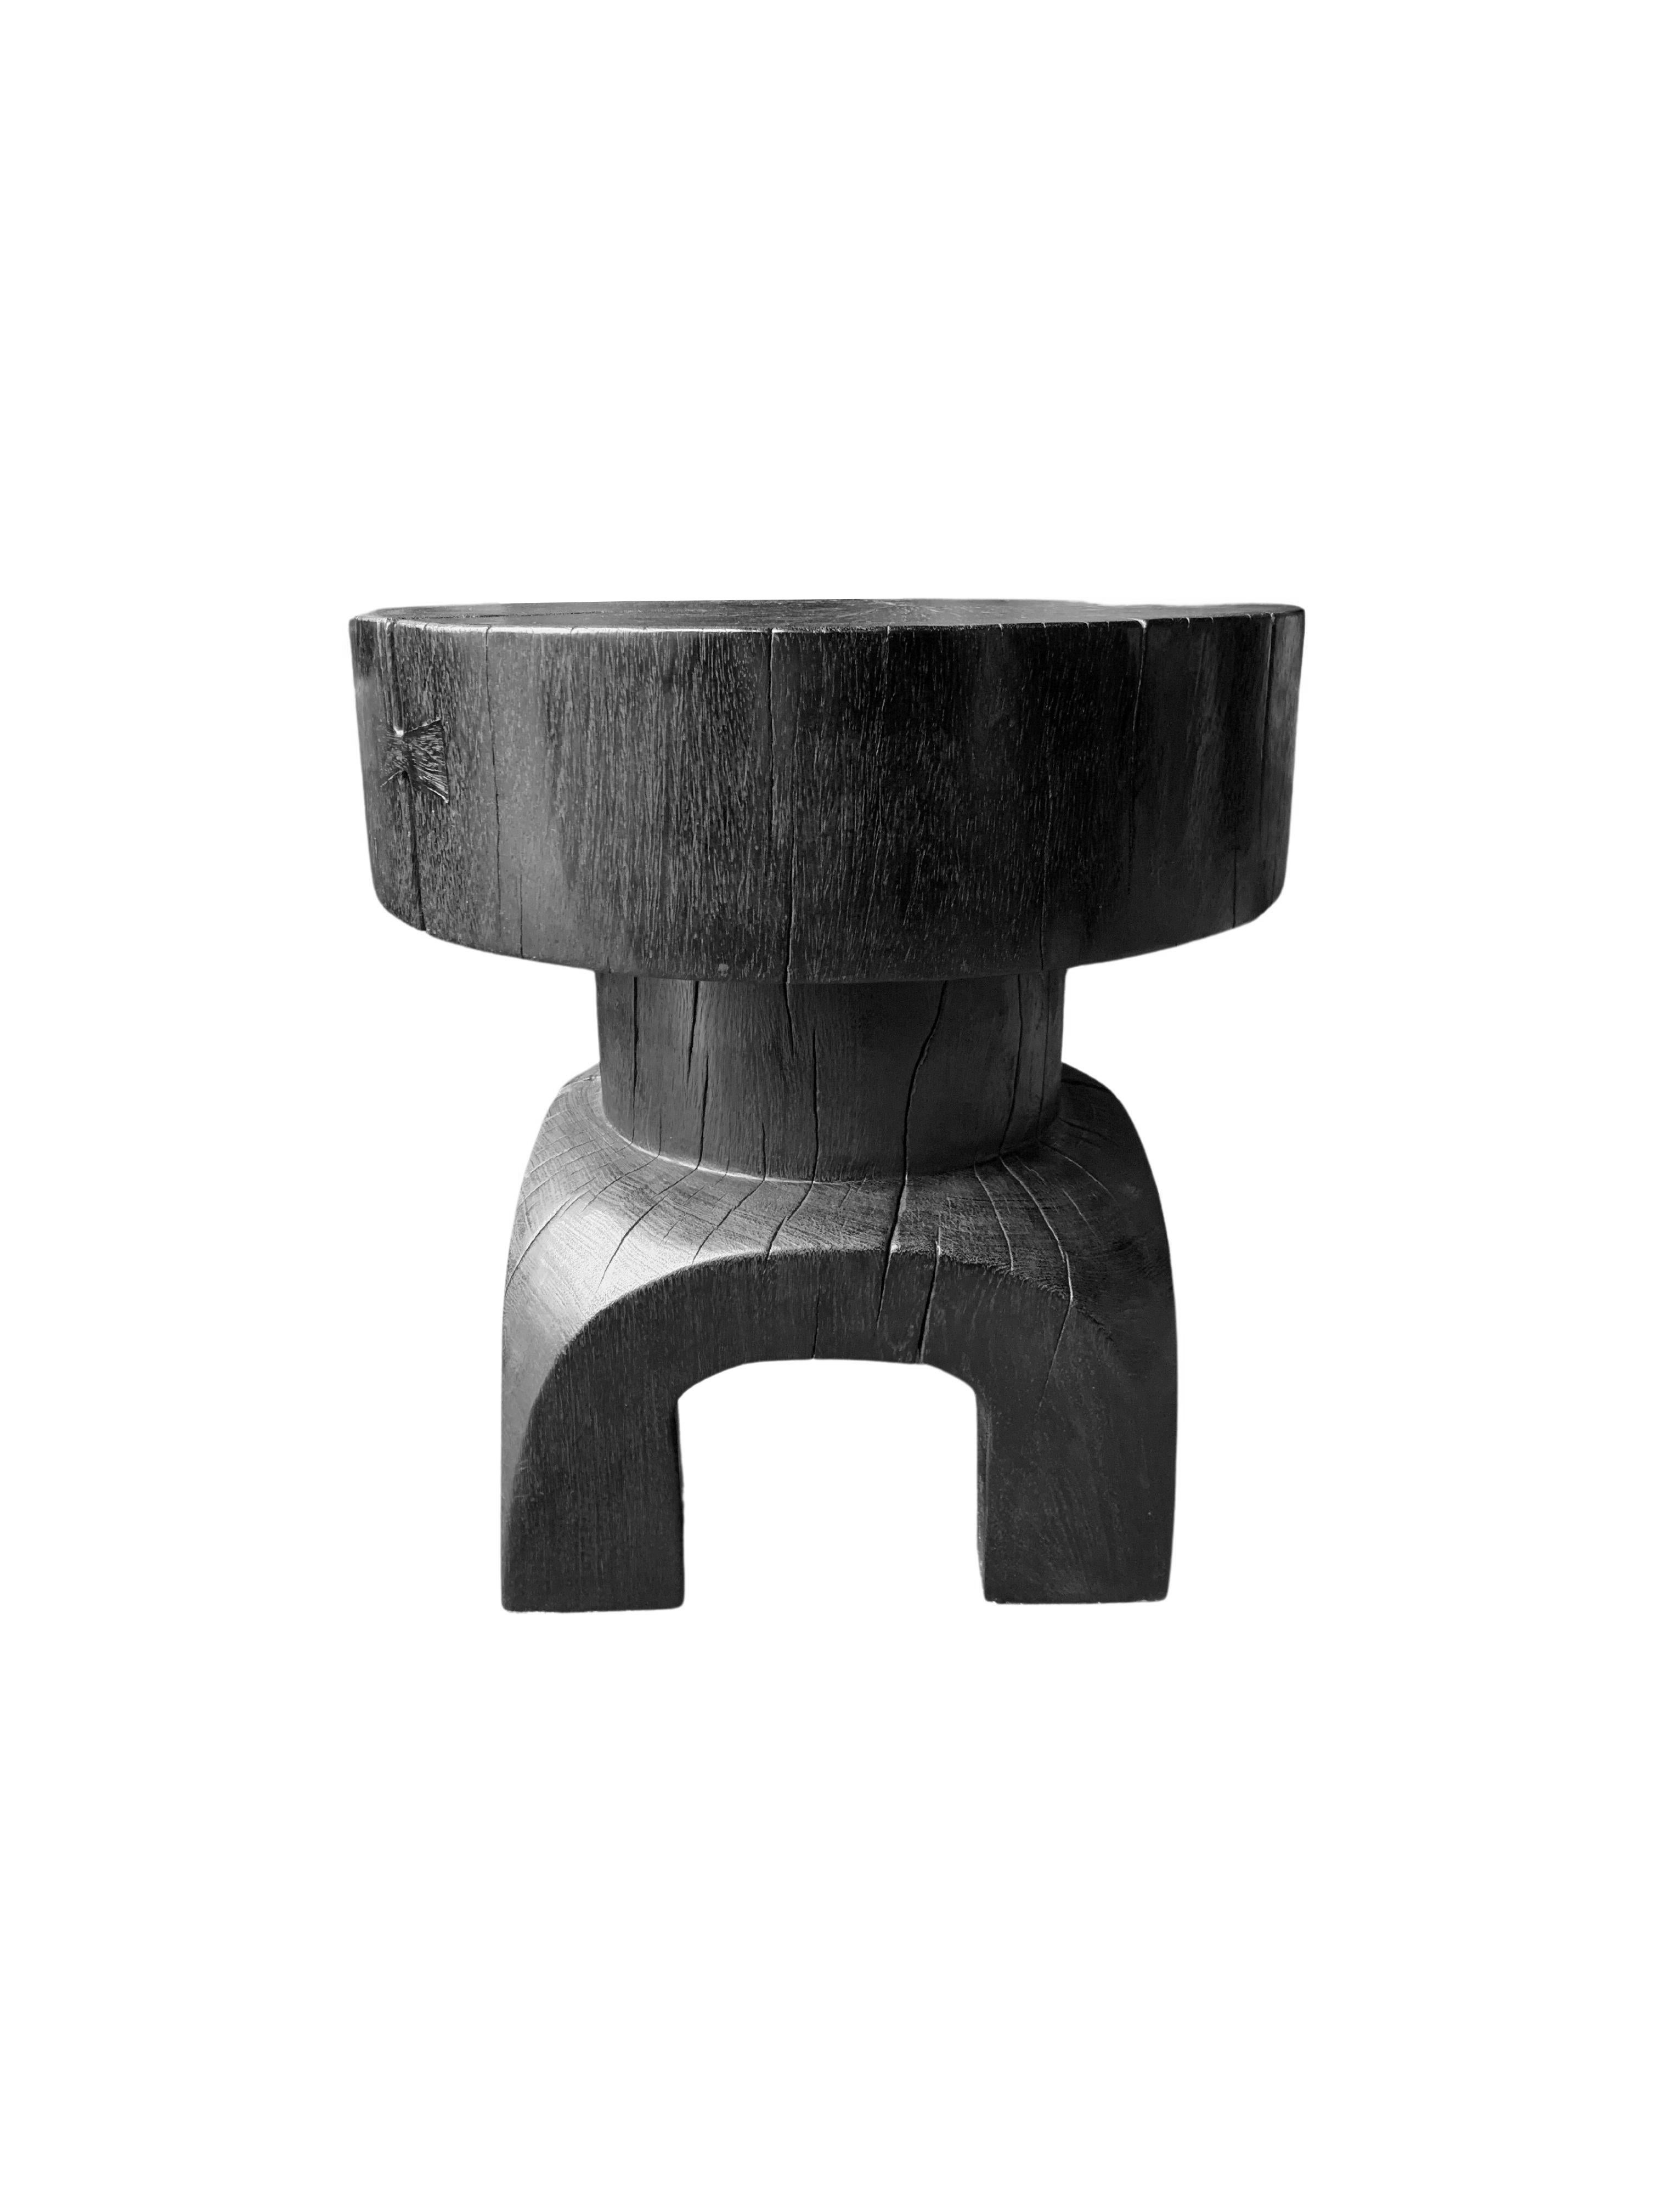 A wonderfully sculptural round side table. Its black pigment was achieved through a burning process creating both a wonderful colour and effect. Its neutral pigment and subtle wood texture makes it perfect for any space. This table was crafted from